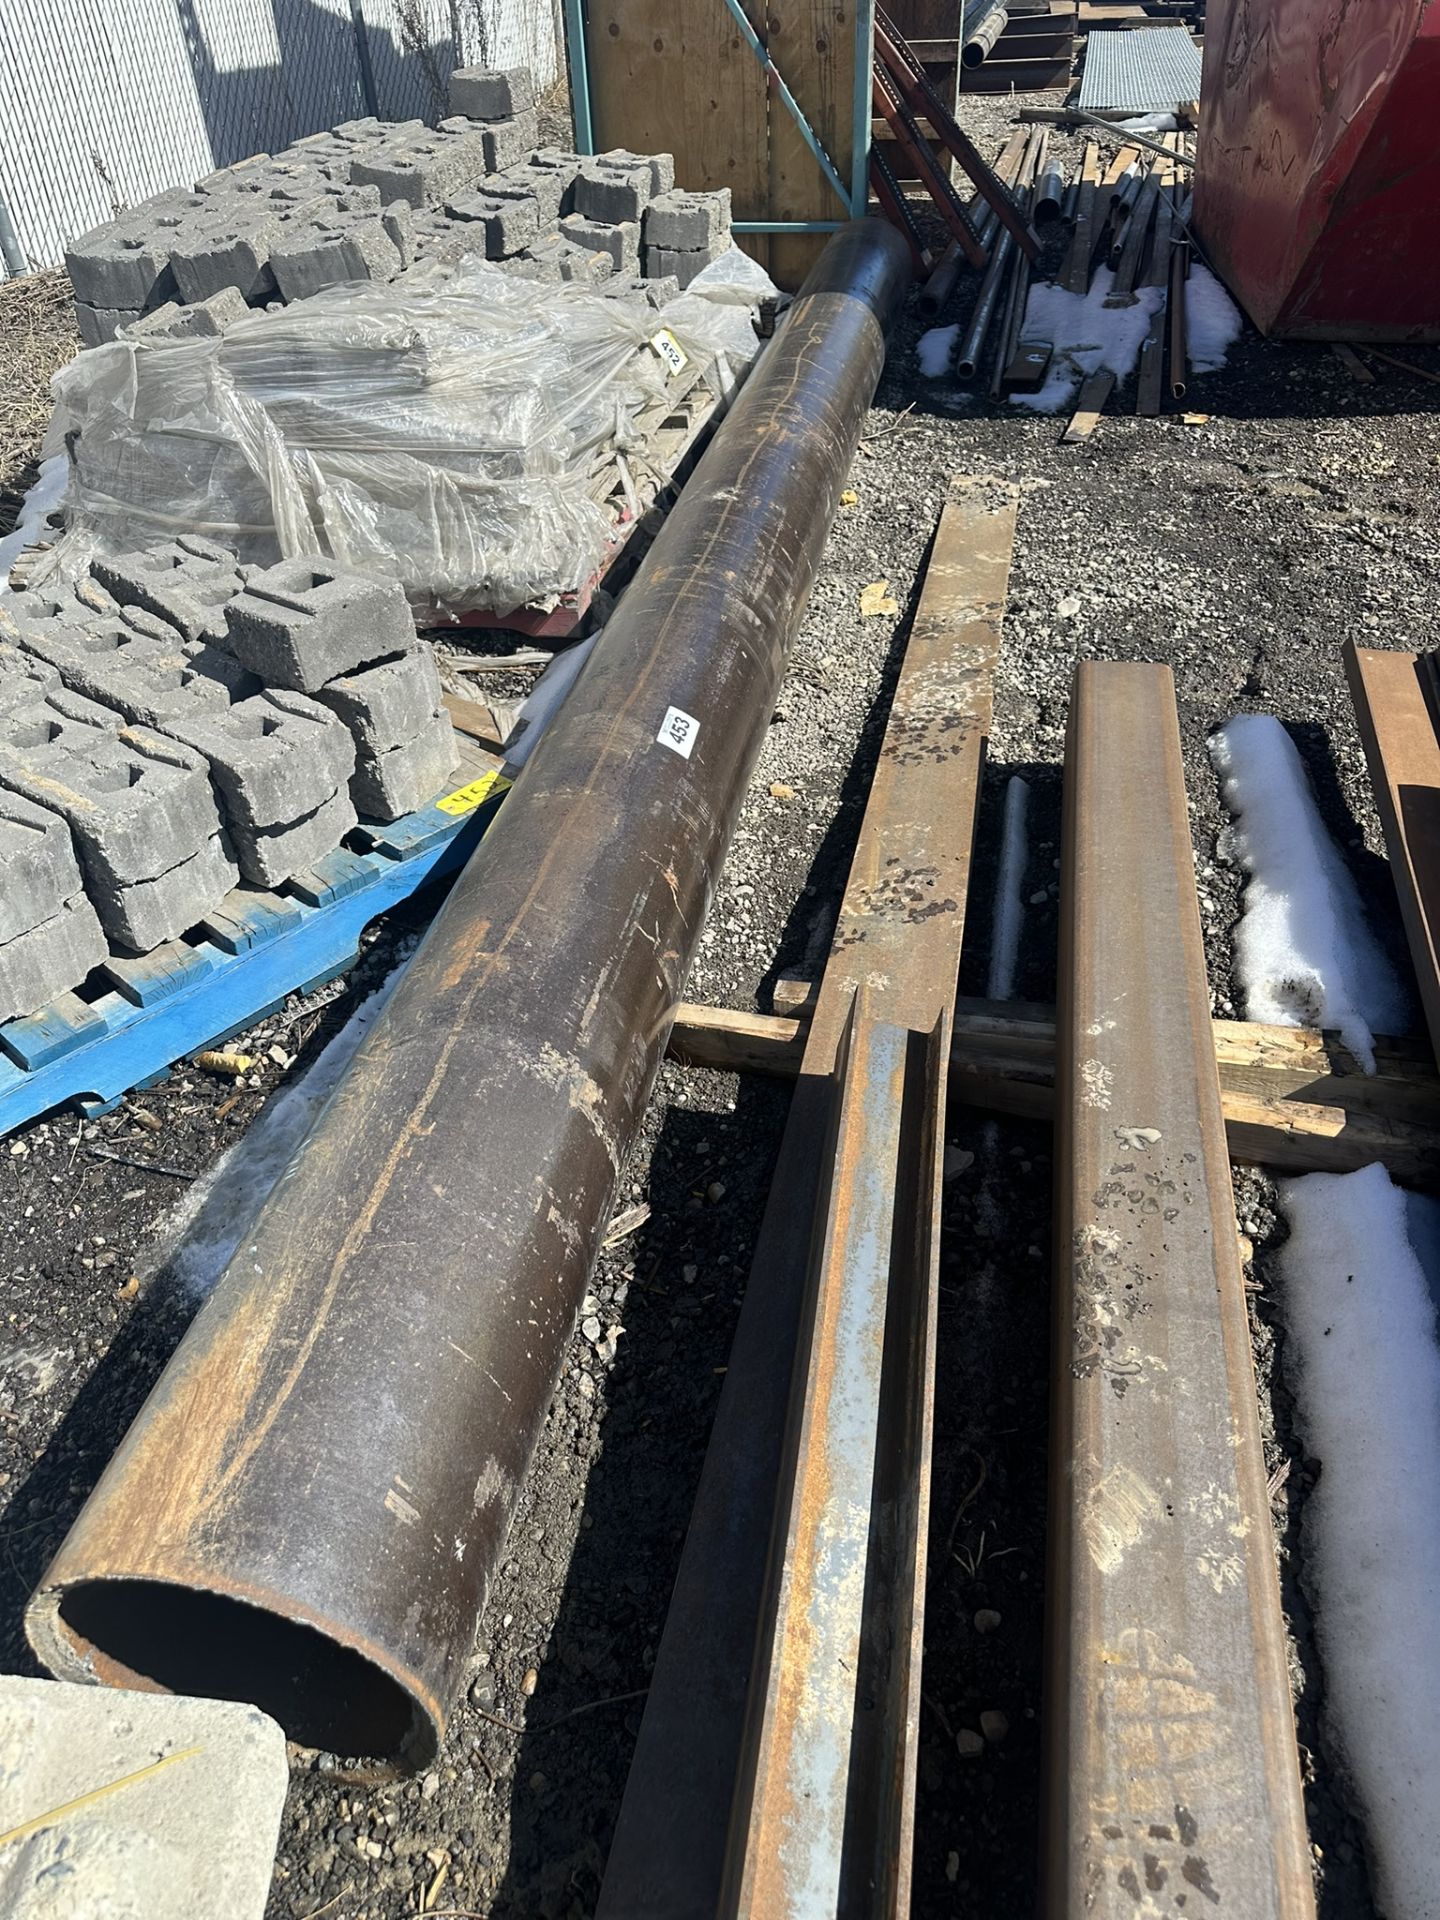 *OFFSITE* LENGTH OF 12" OD x16' SCH. 80 PIPE (SIZES ARE APPROXIMATE)